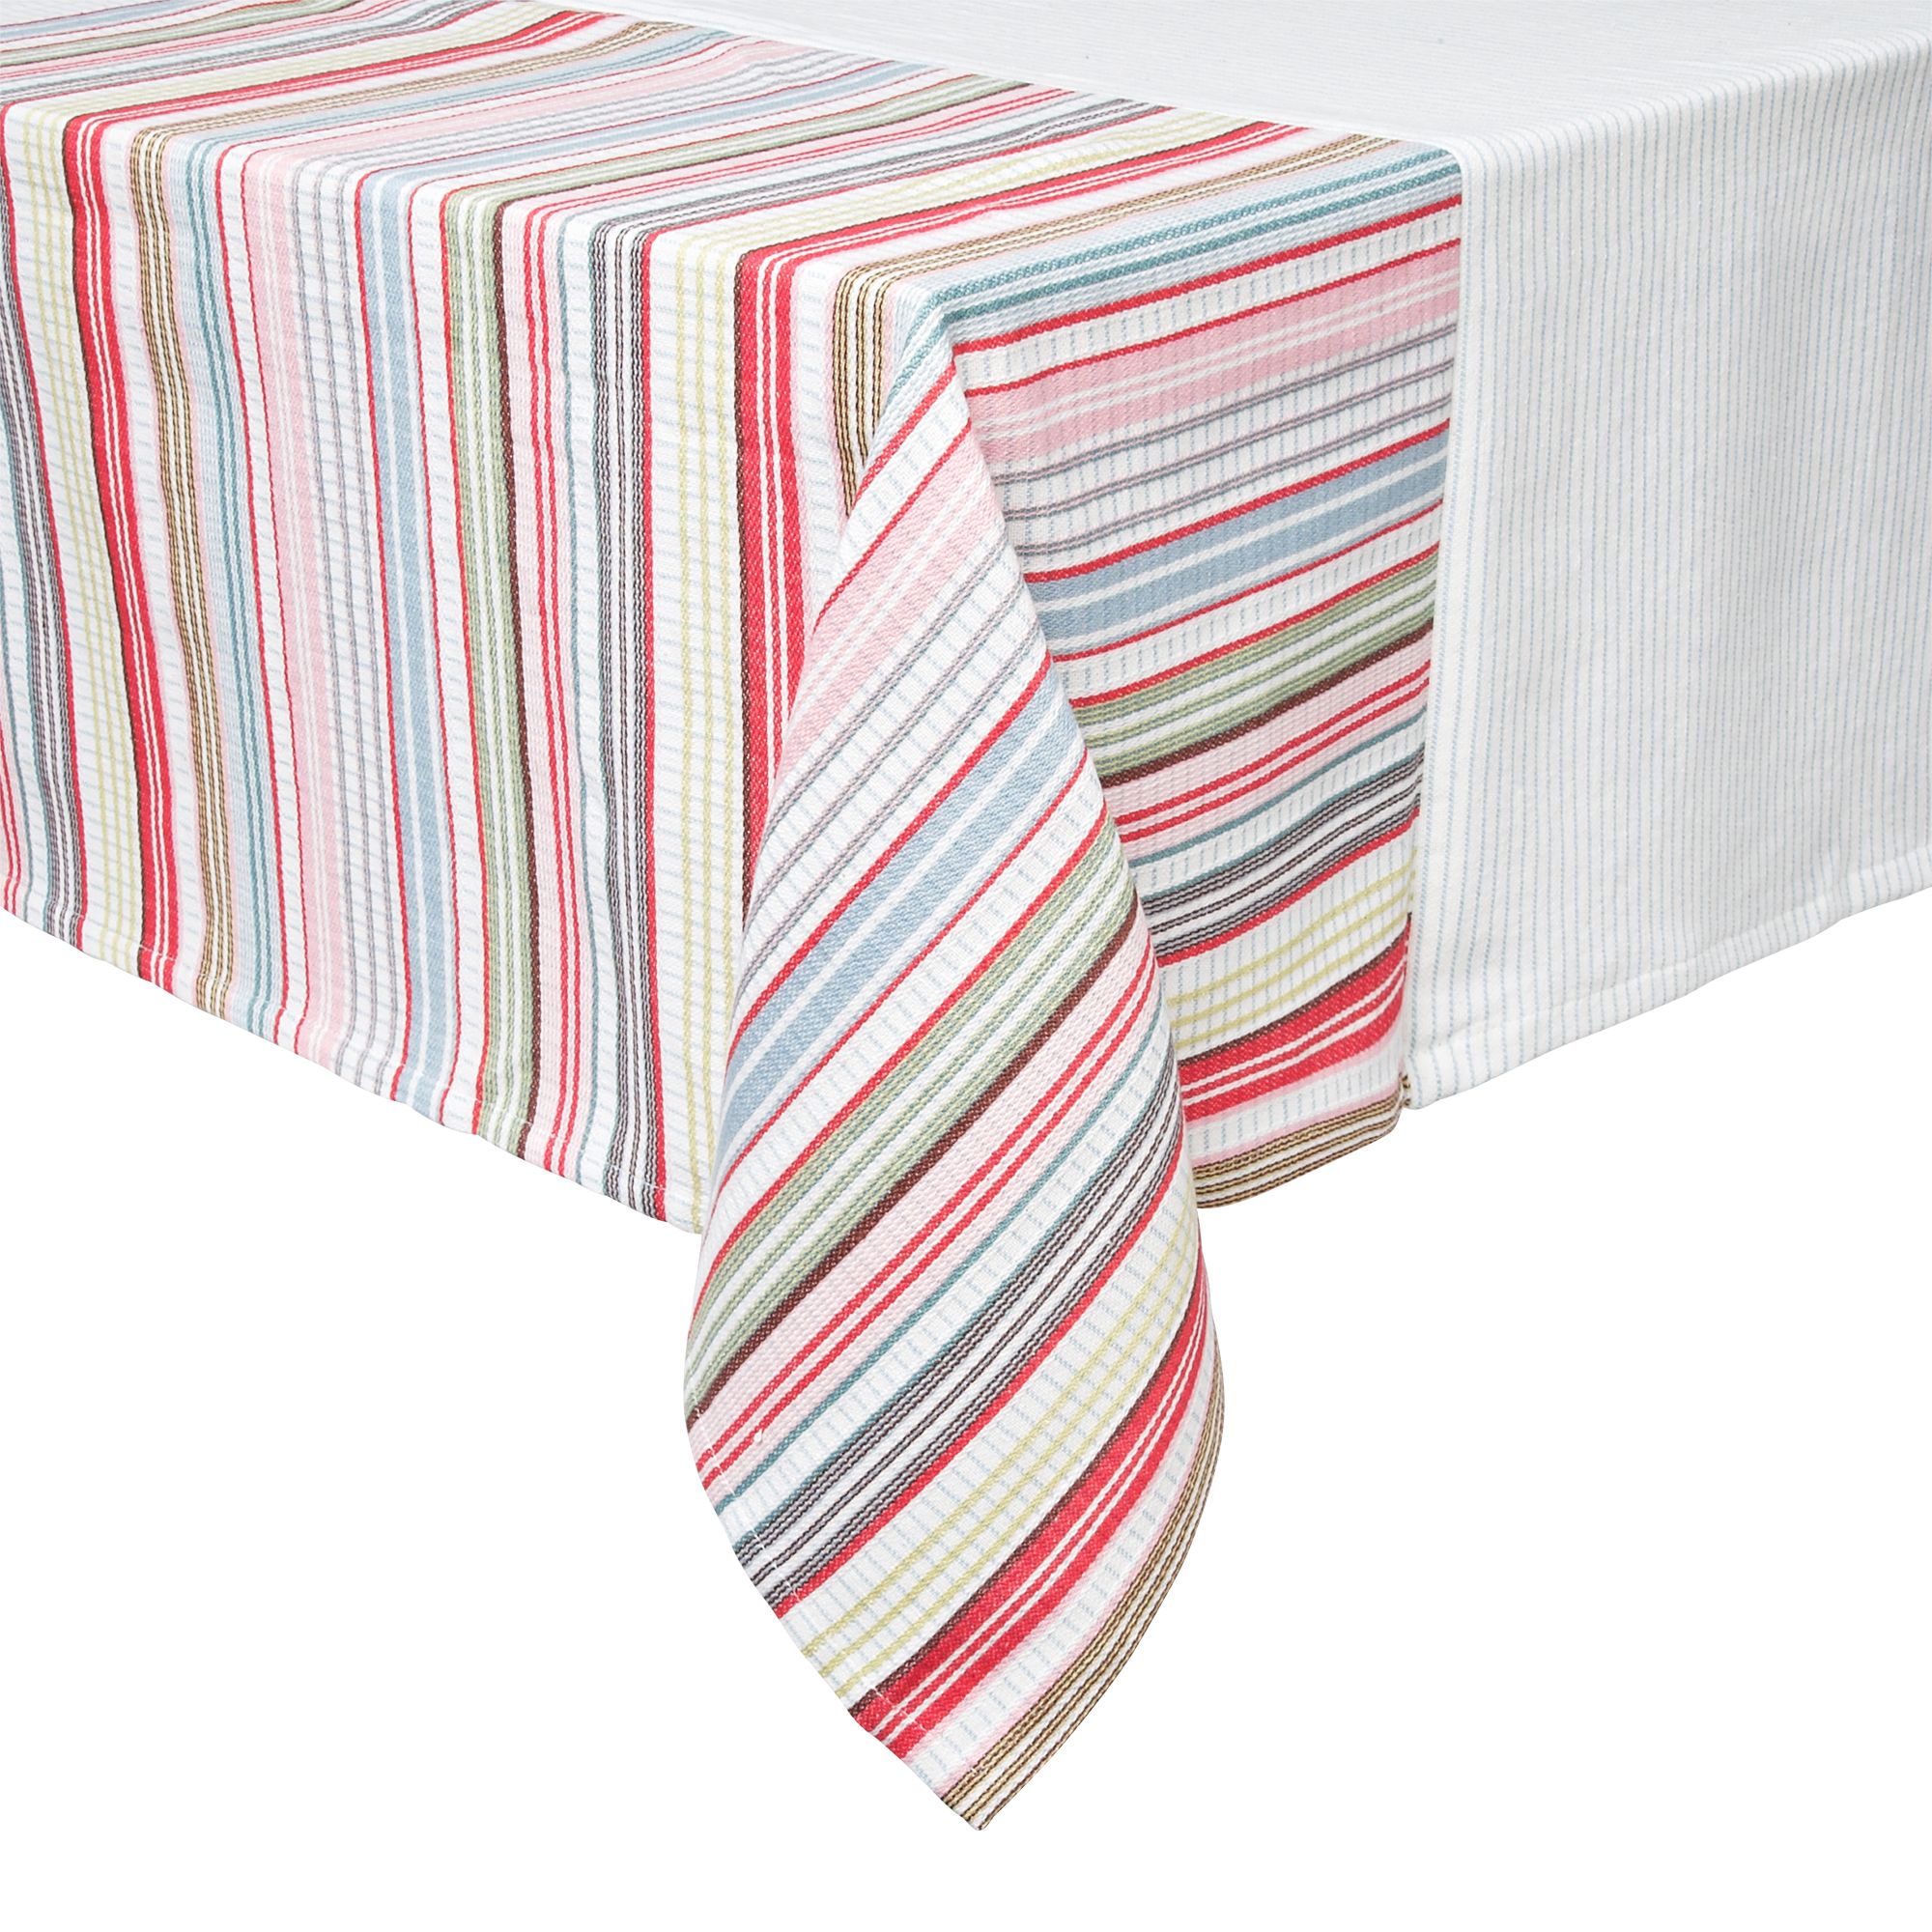 cath kidston table cover